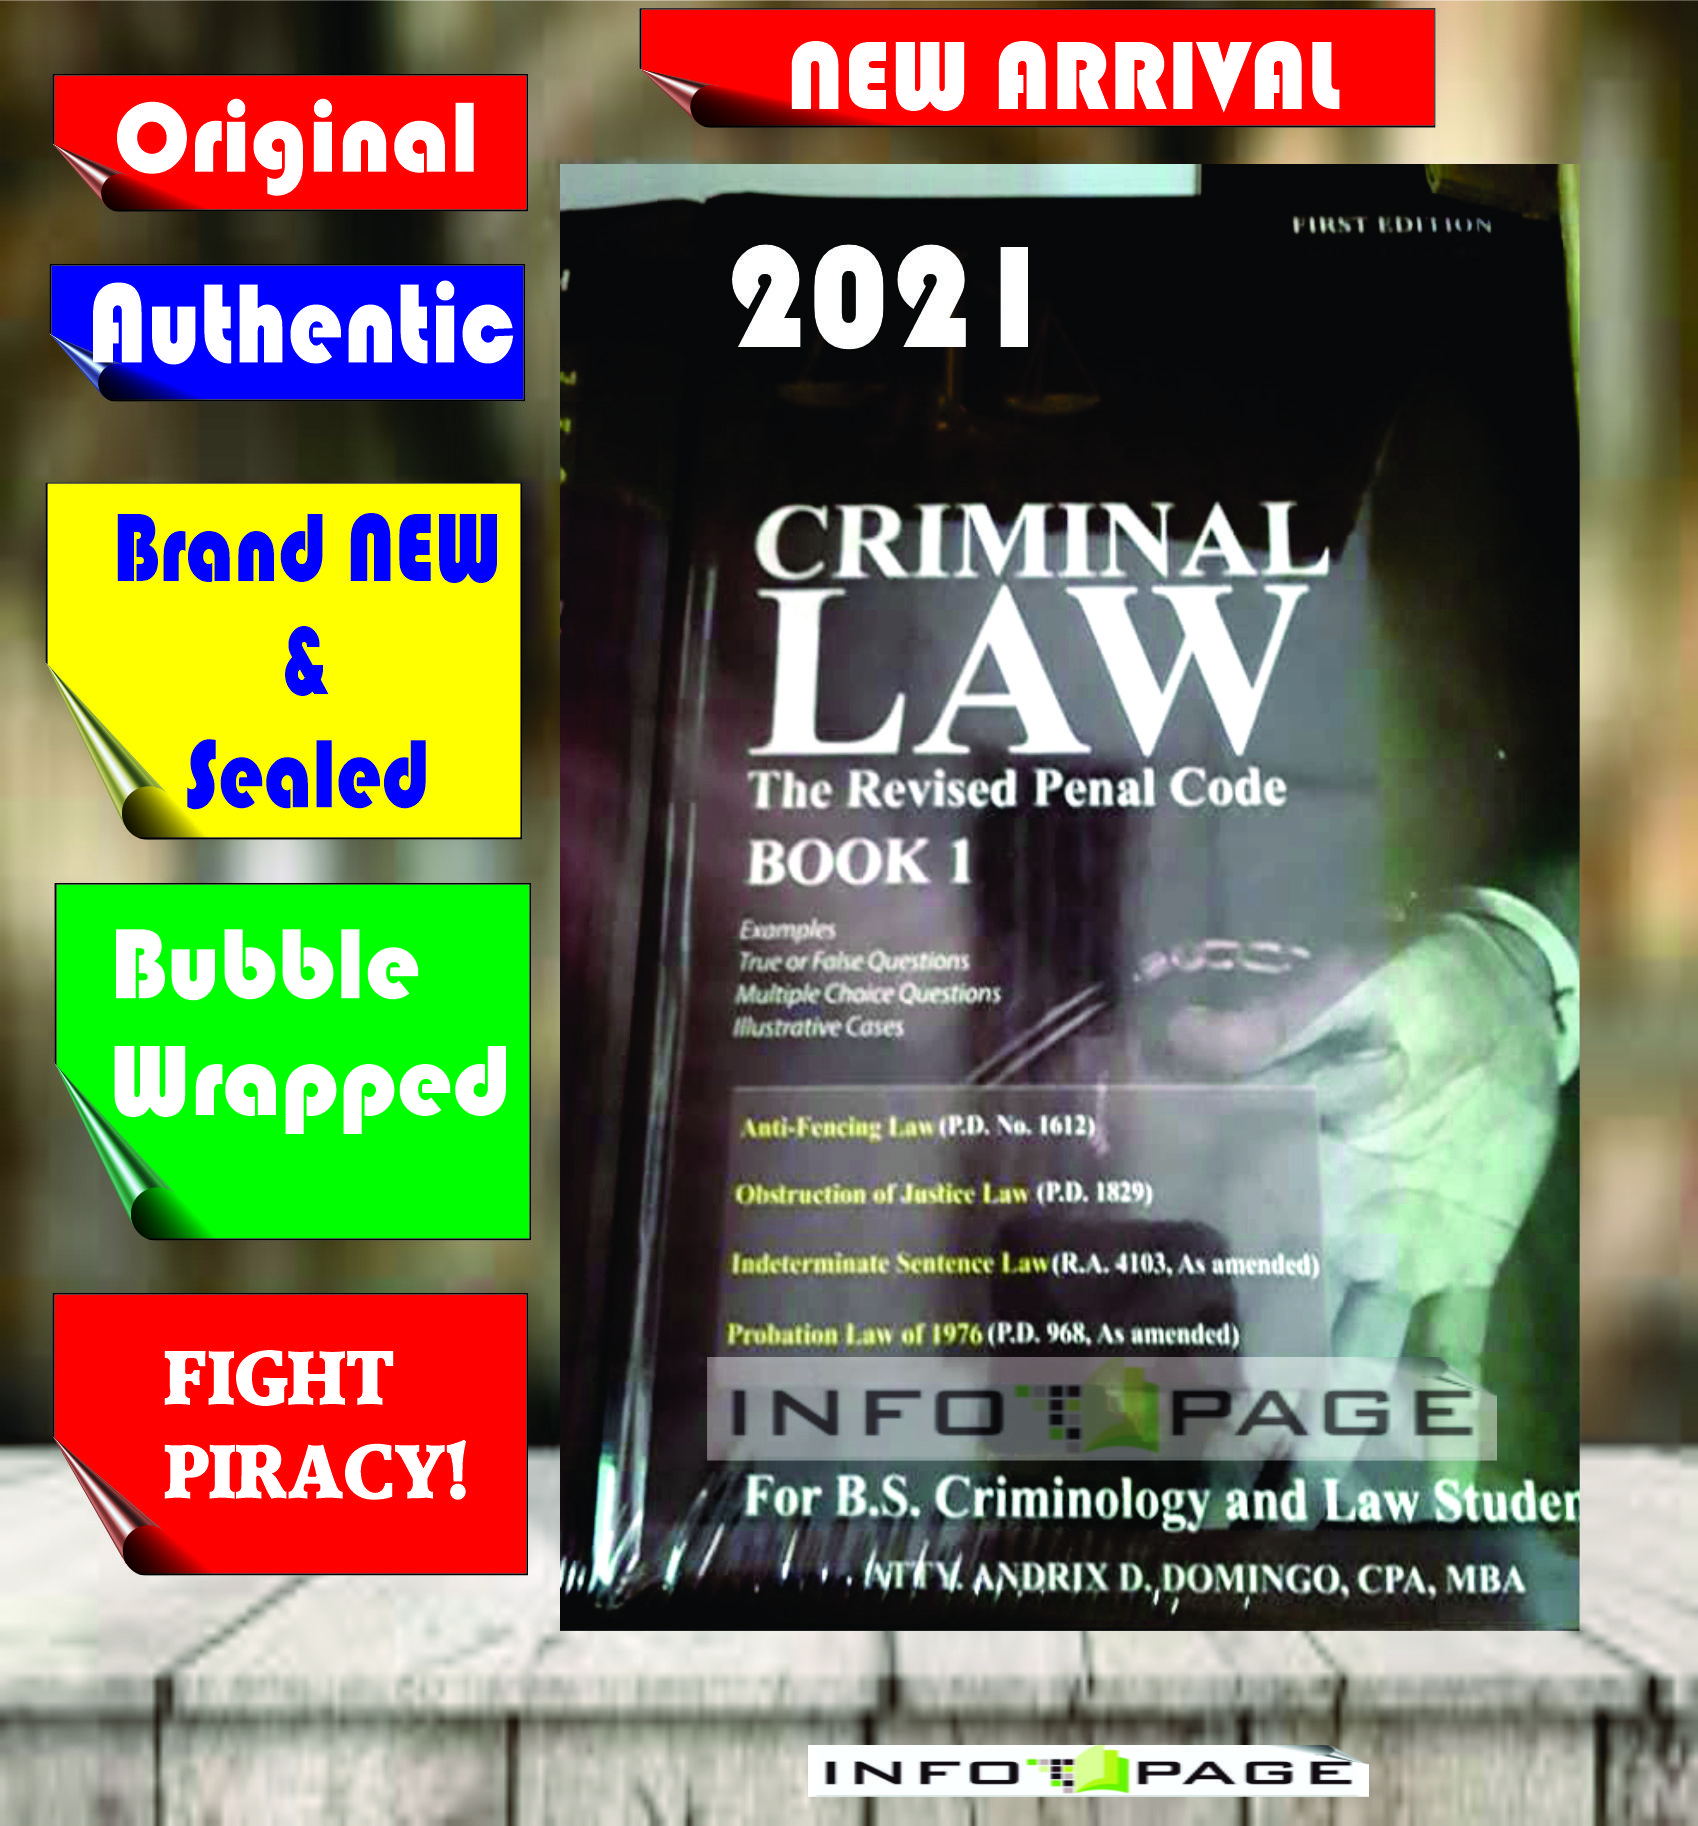 AUTHENTIC (2021) The Revised Penal Code CRIMINAL LAW Book 1 by Andrix